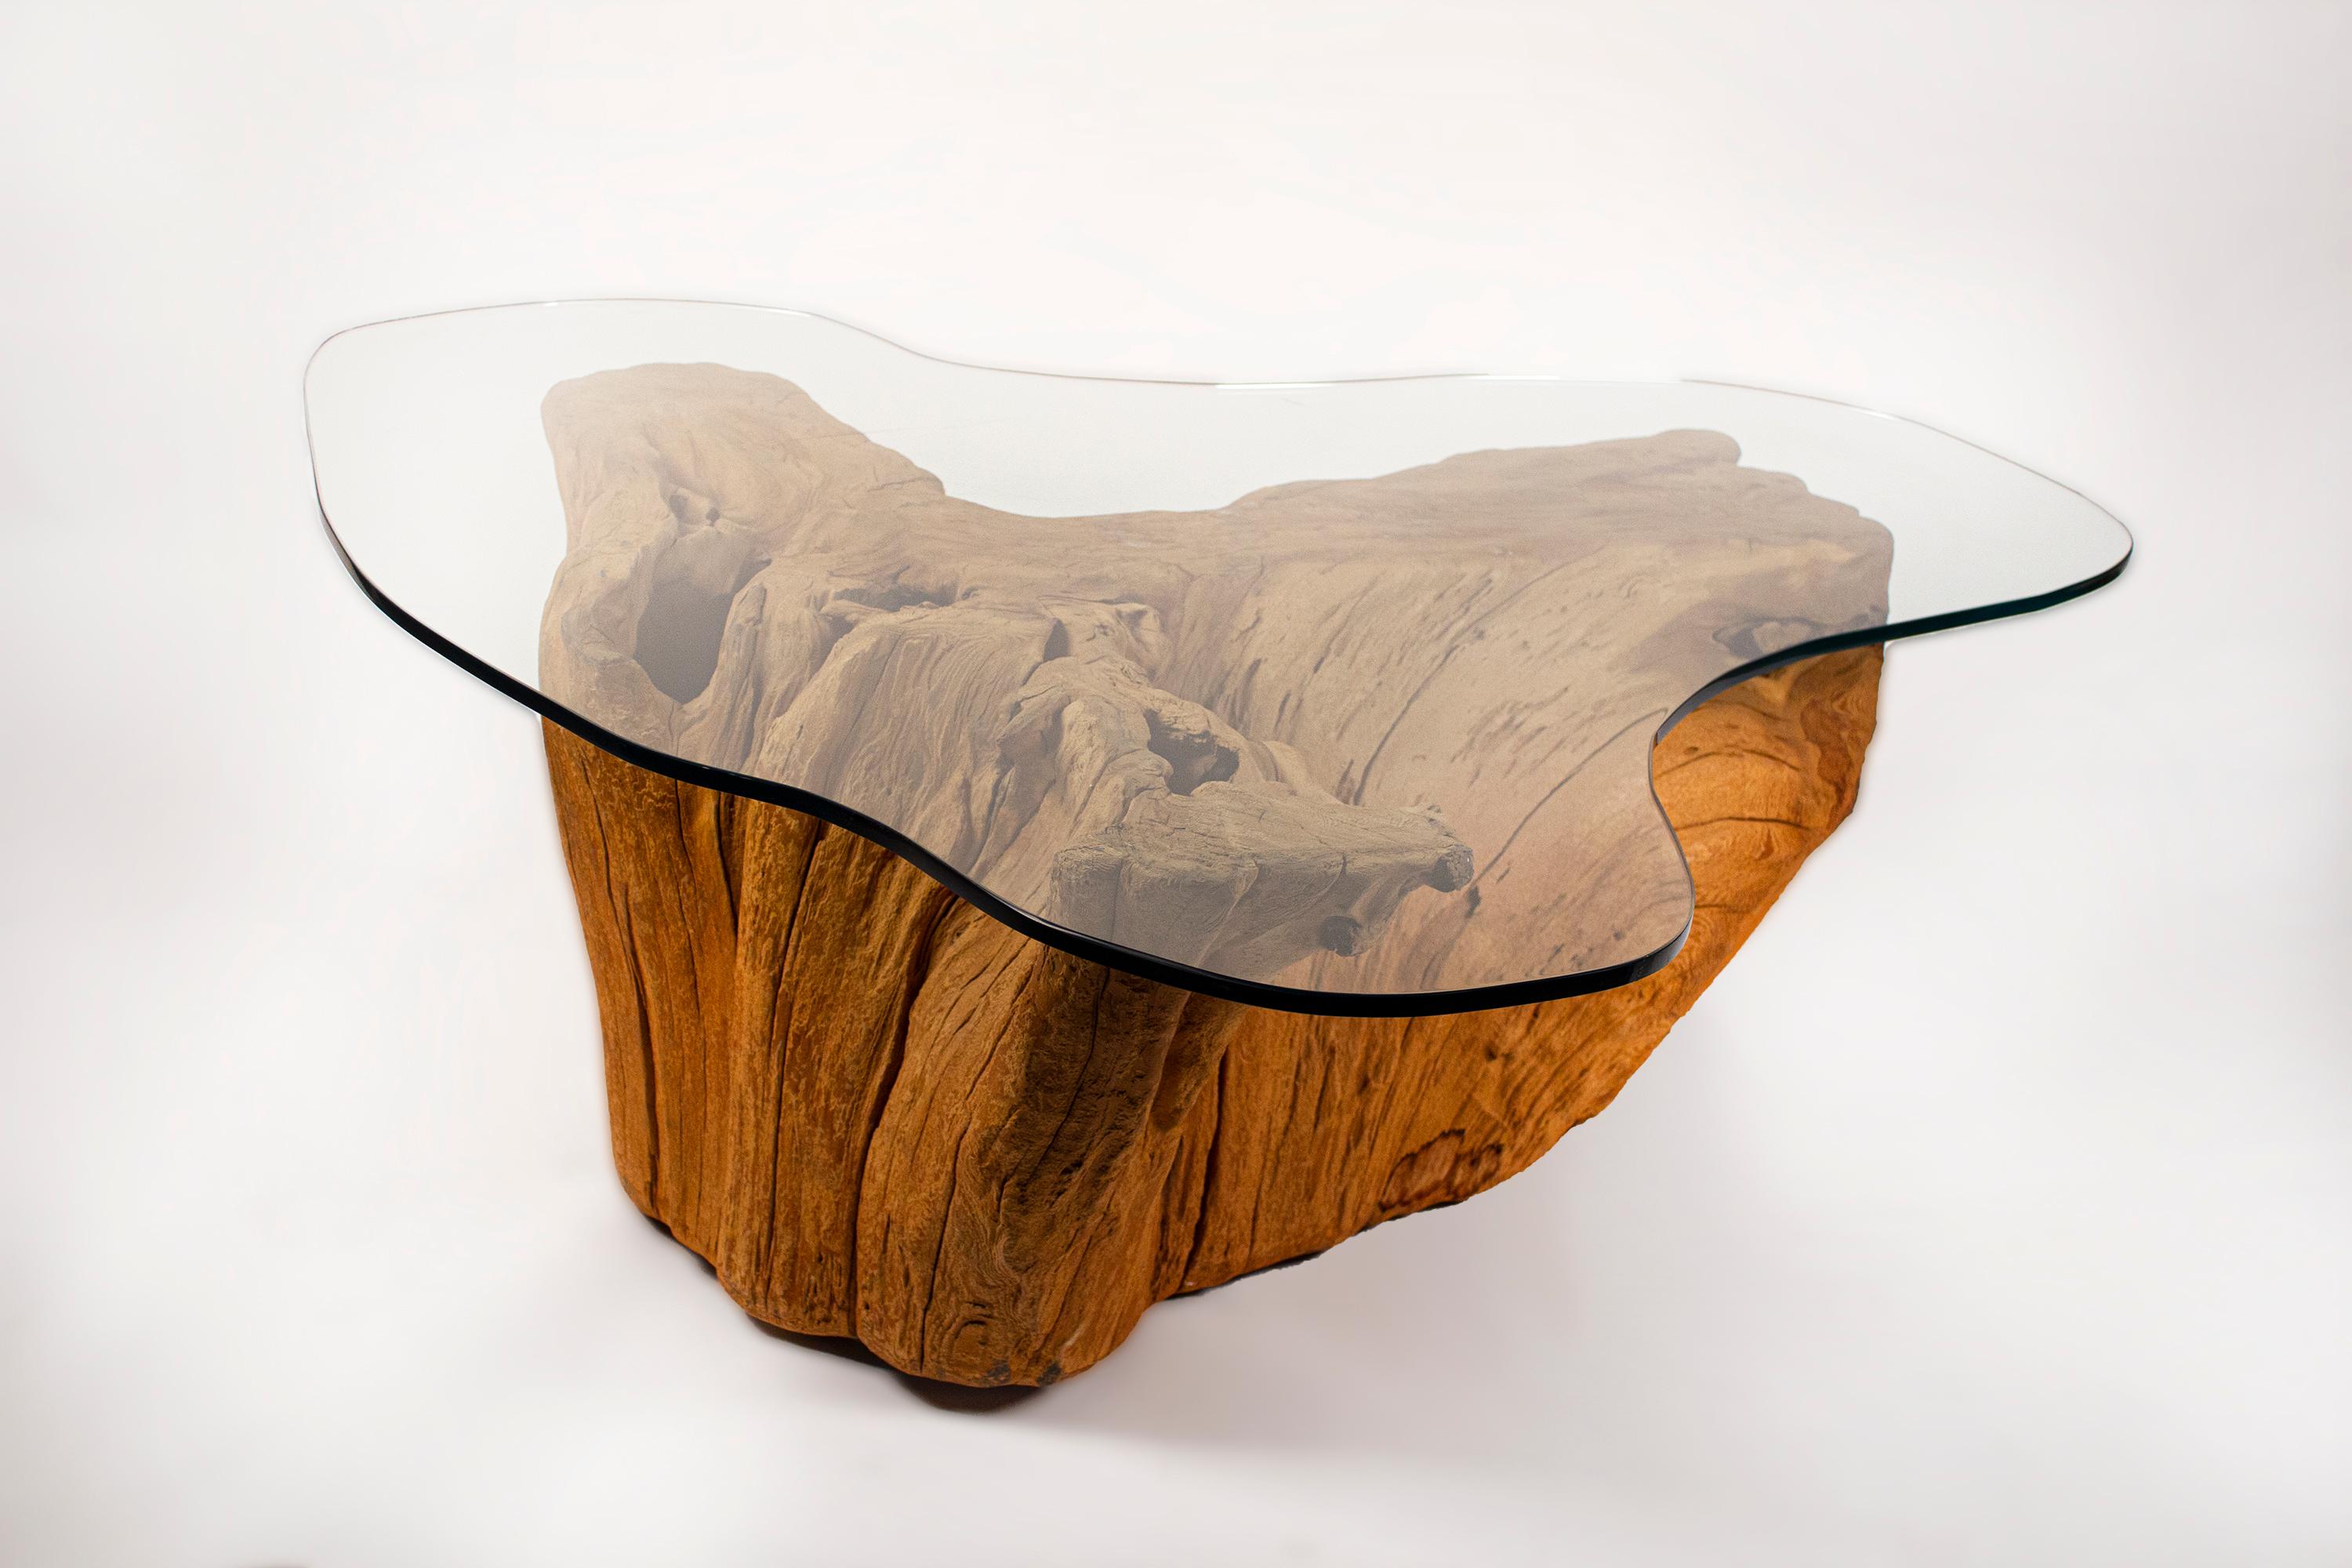 California Mid-Century Modern designer tree trunk coffee table made in the 1970s from an ancient cypress tree trunk. Retains the original irregular cloud-shaped glass top.

 The wood has been sandblasted to expose the striations in the graining.